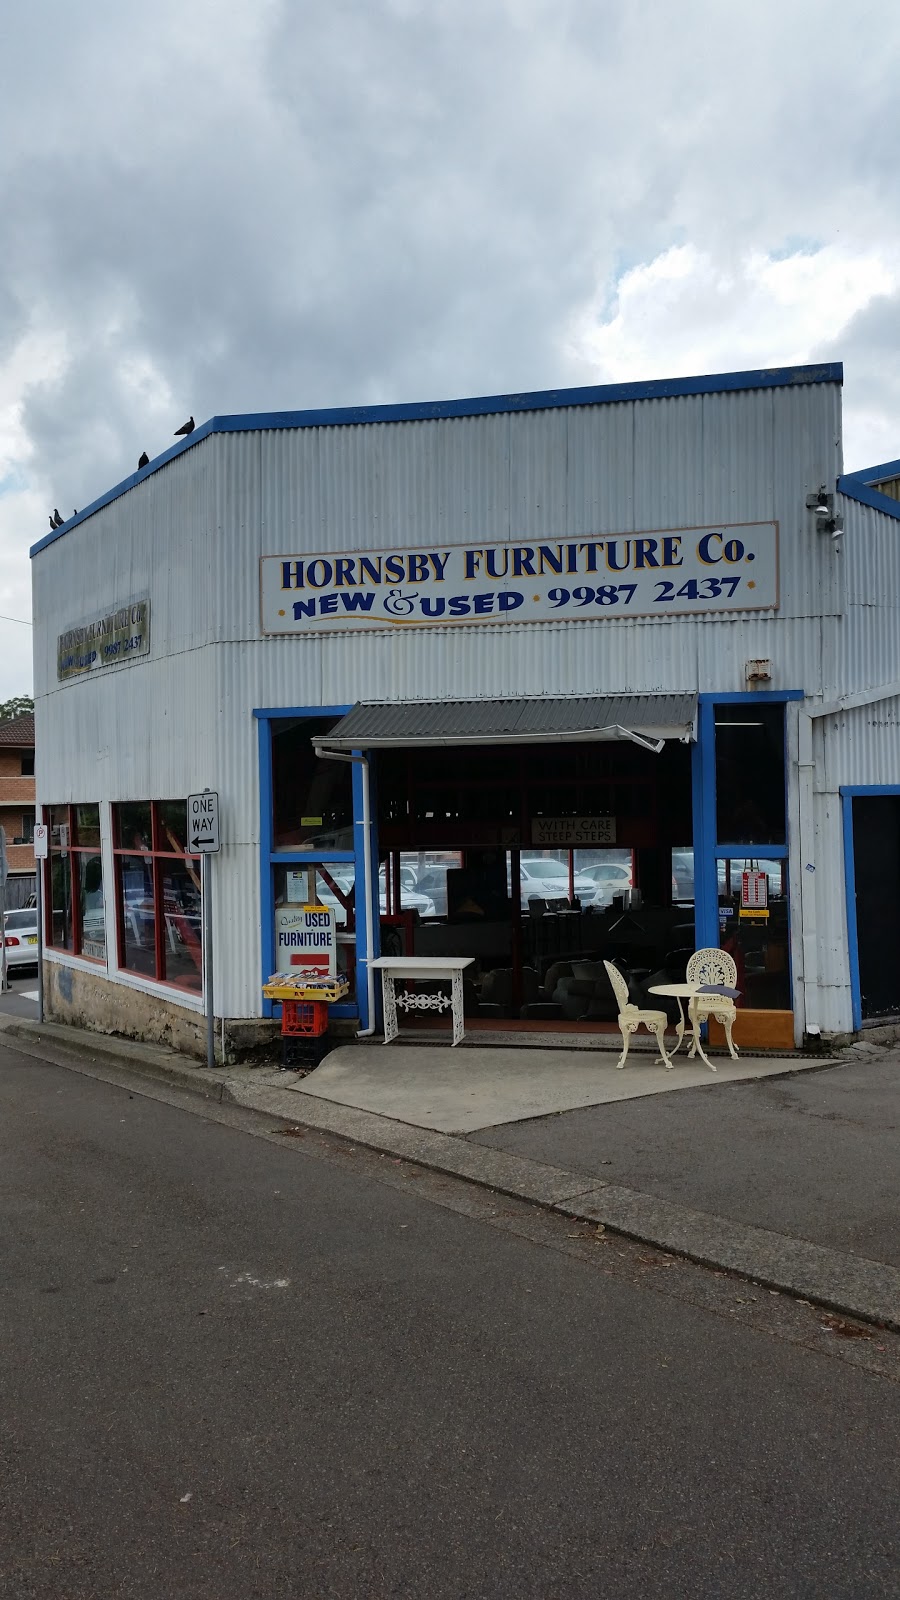 Hornsby Furniture Co. | 4 Dural Ln, Hornsby NSW 2077, Australia | Phone: (02) 9987 2437